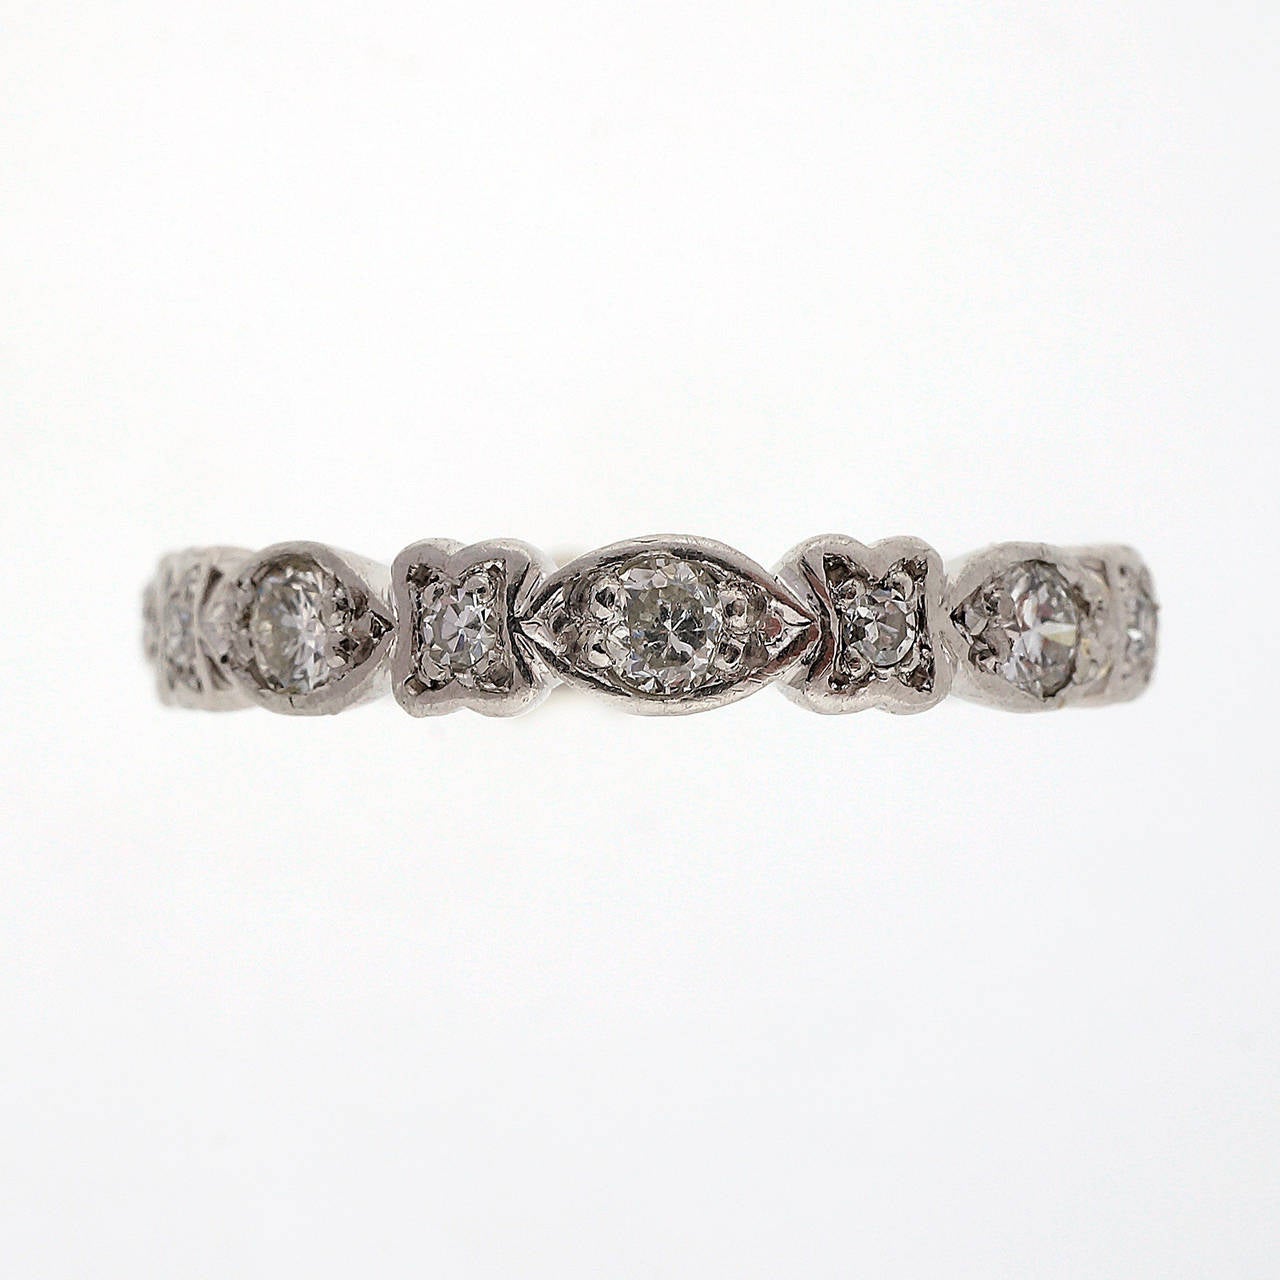 1930-1940 handmade Platinum Eternity ring set with bright white diamonds. an original style. Made for a size 8 hand.

18 full cut diamonds, approx. total weight .75cts, F, VS
Platinum
3.8 grams
Tested: Platinum
Stamped: Not
Width at